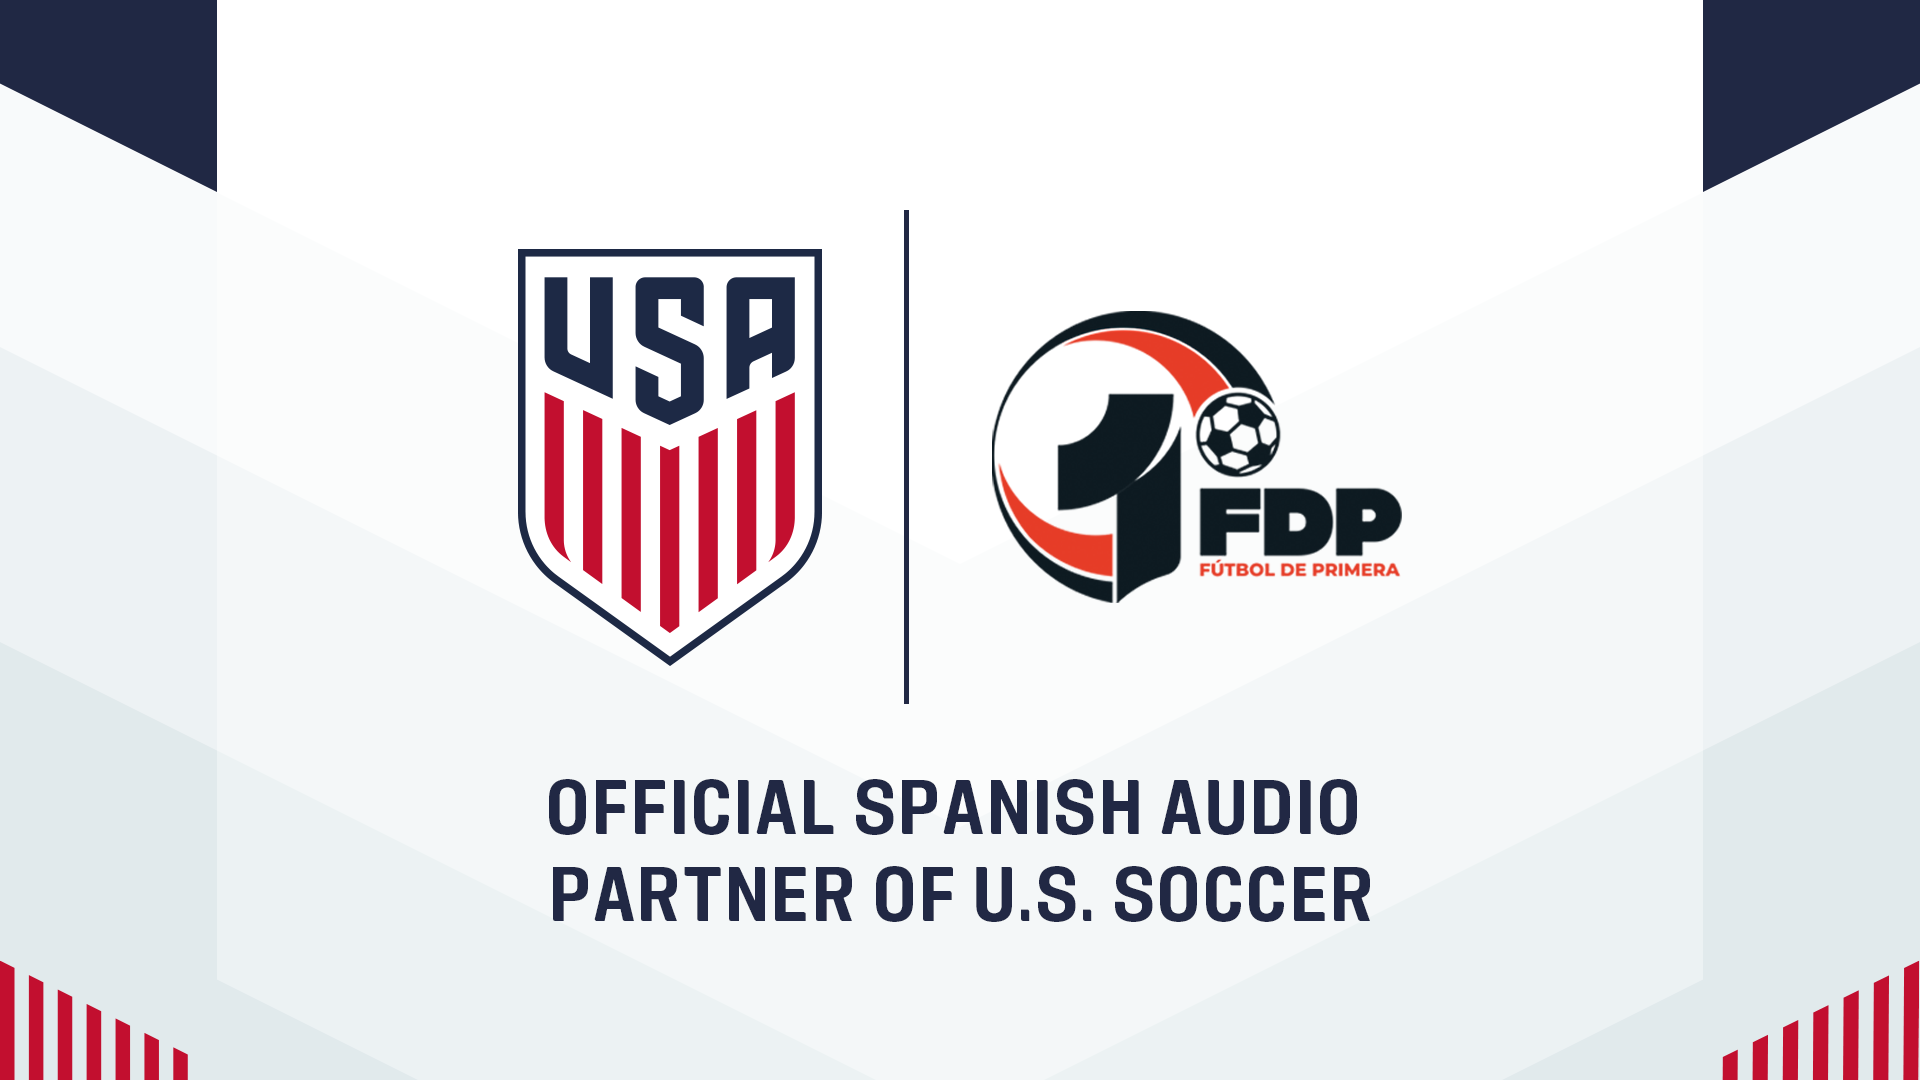 David Wright Named Chief Commercial Officer at U.S. Soccer